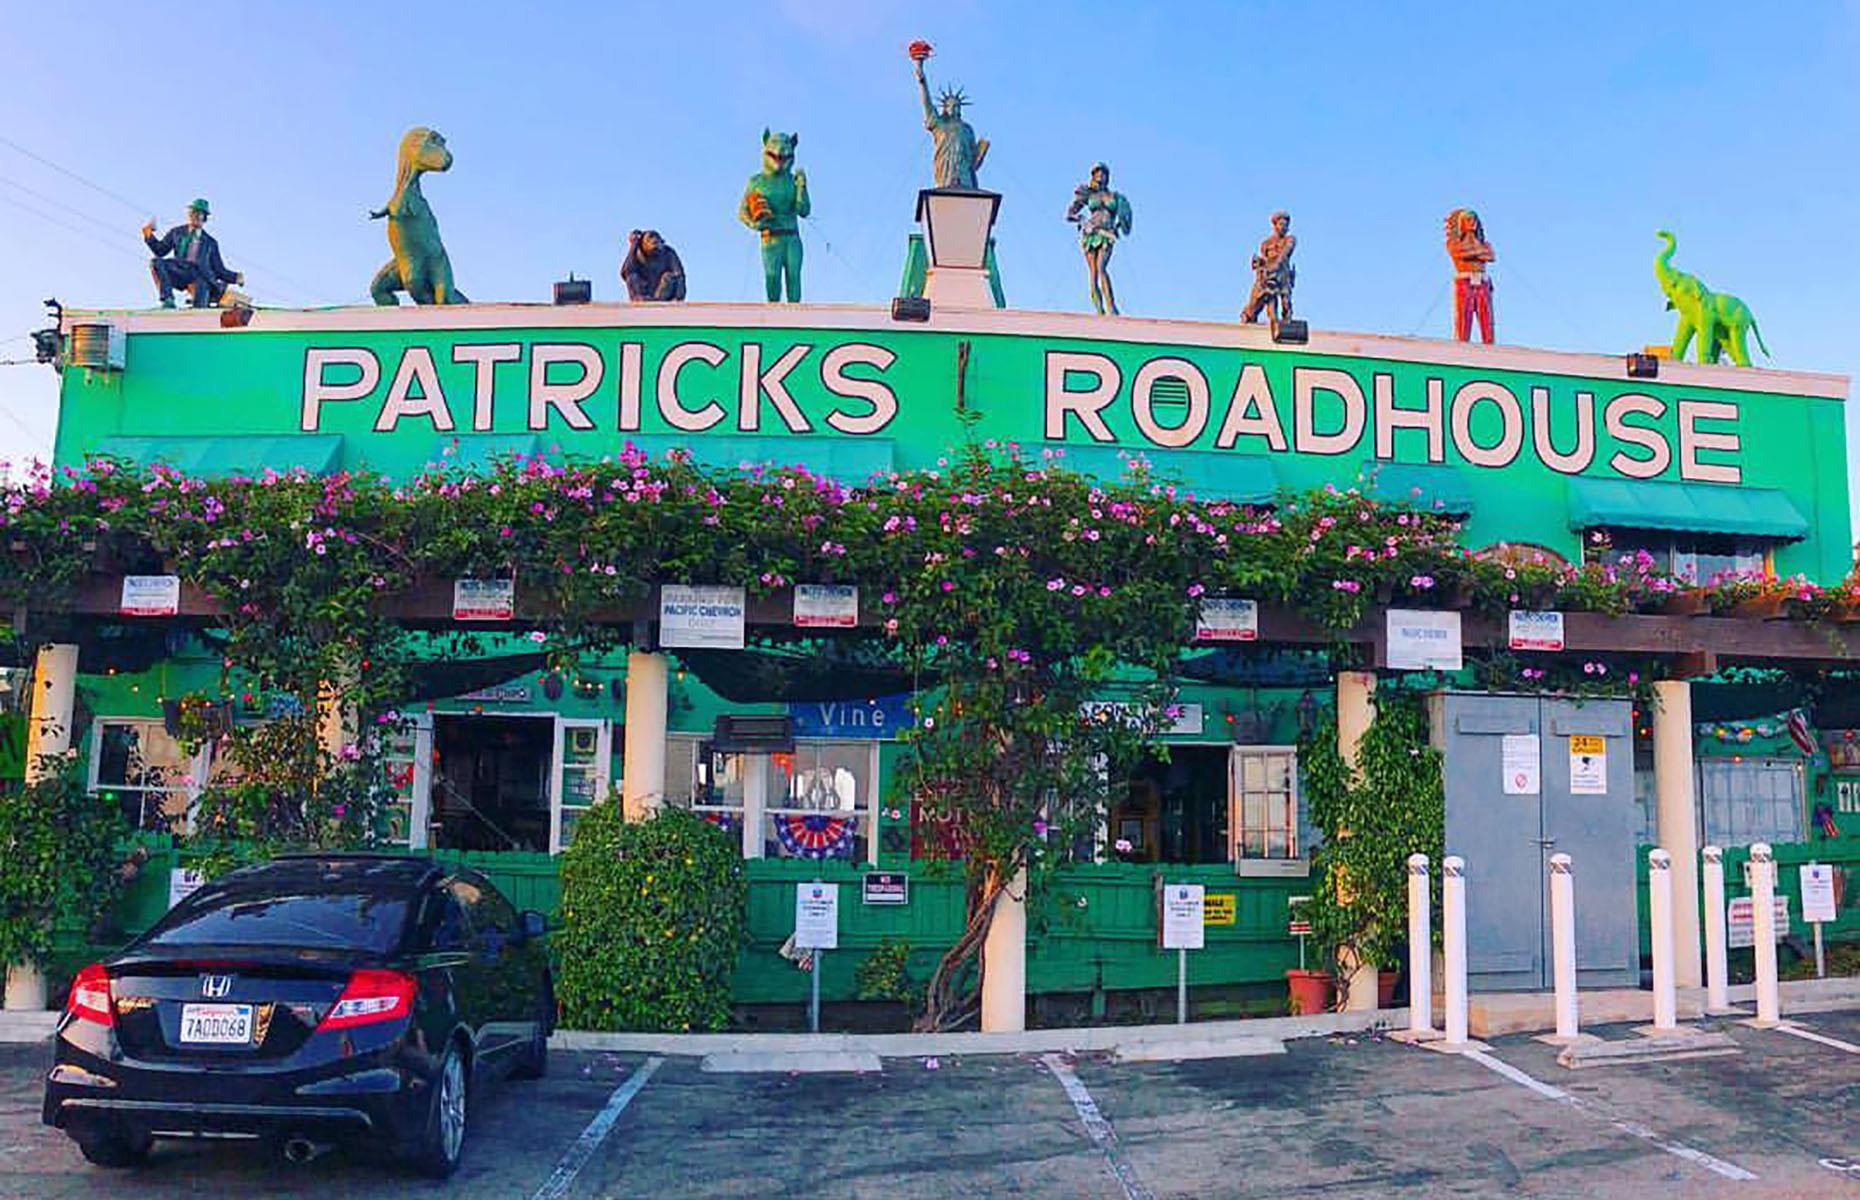 <p>If you're traveling up or down the state this season, Patrick's Roadhouse just off the Pacific Coast Highway in Santa Monica is a fun place to rest. Established in 1973, the shamrock green diner is known for its atmospheric 1940s feel, big breakfasts and burgers. Don’t miss out on the coconut cream pie <a href="https://www.yelp.com/biz/patricks-roadhouse-santa-monica-3">and coffee either</a>. <a href="https://www.facebook.com/PatricksRoadhouse/">Outdoor seating</a> is available.</p>  <p><a href="https://www.lovefood.com/galleries/70068/the-best-burger-and-fries-joint-in-every-state?page=1"><strong>Want more burgers and fries? These are the best joints in every state</strong></a></p>